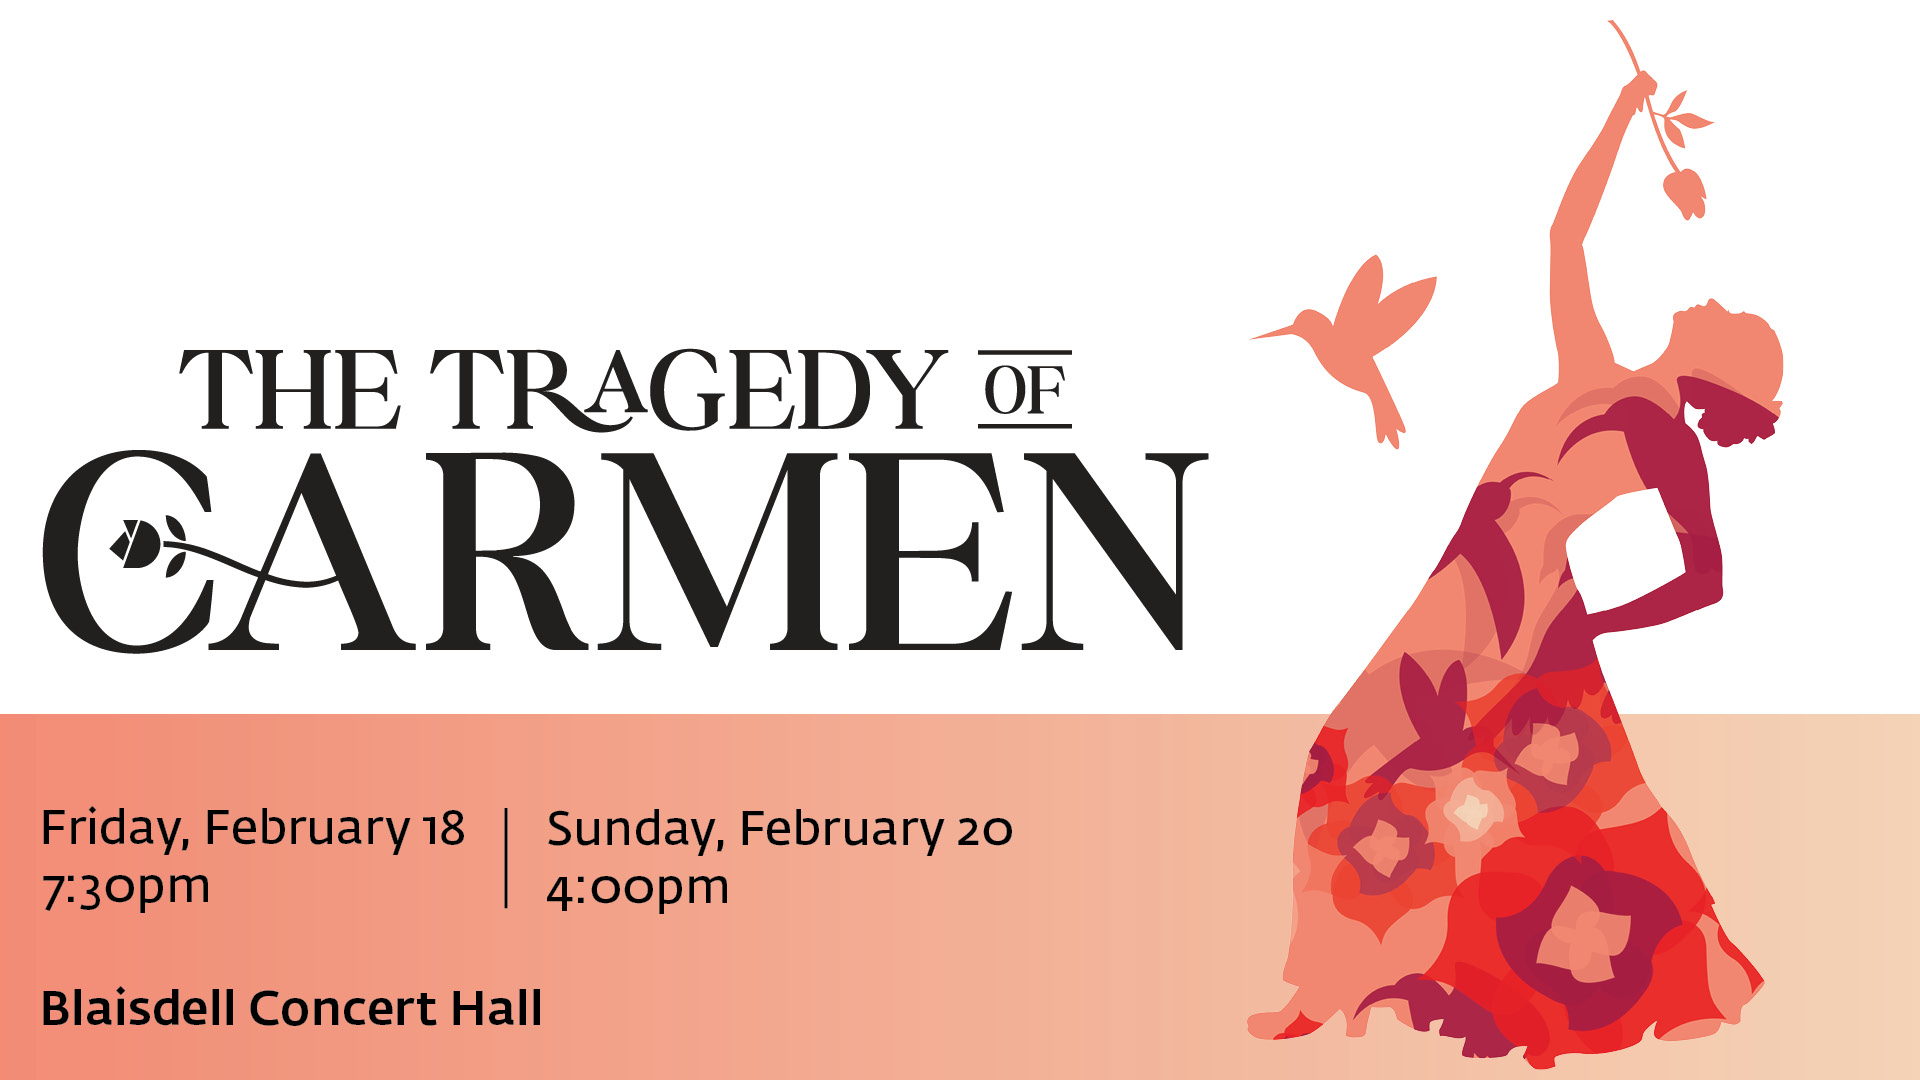 Silhouette of a female identifying dancer holding a rose with the image of humming birds and flowers inside the shapes, the words The Tragedy of Carmen, Friday February 18, 7:30pm, Sunday February 20, 4:00pm, Blaisdell Concert Hall